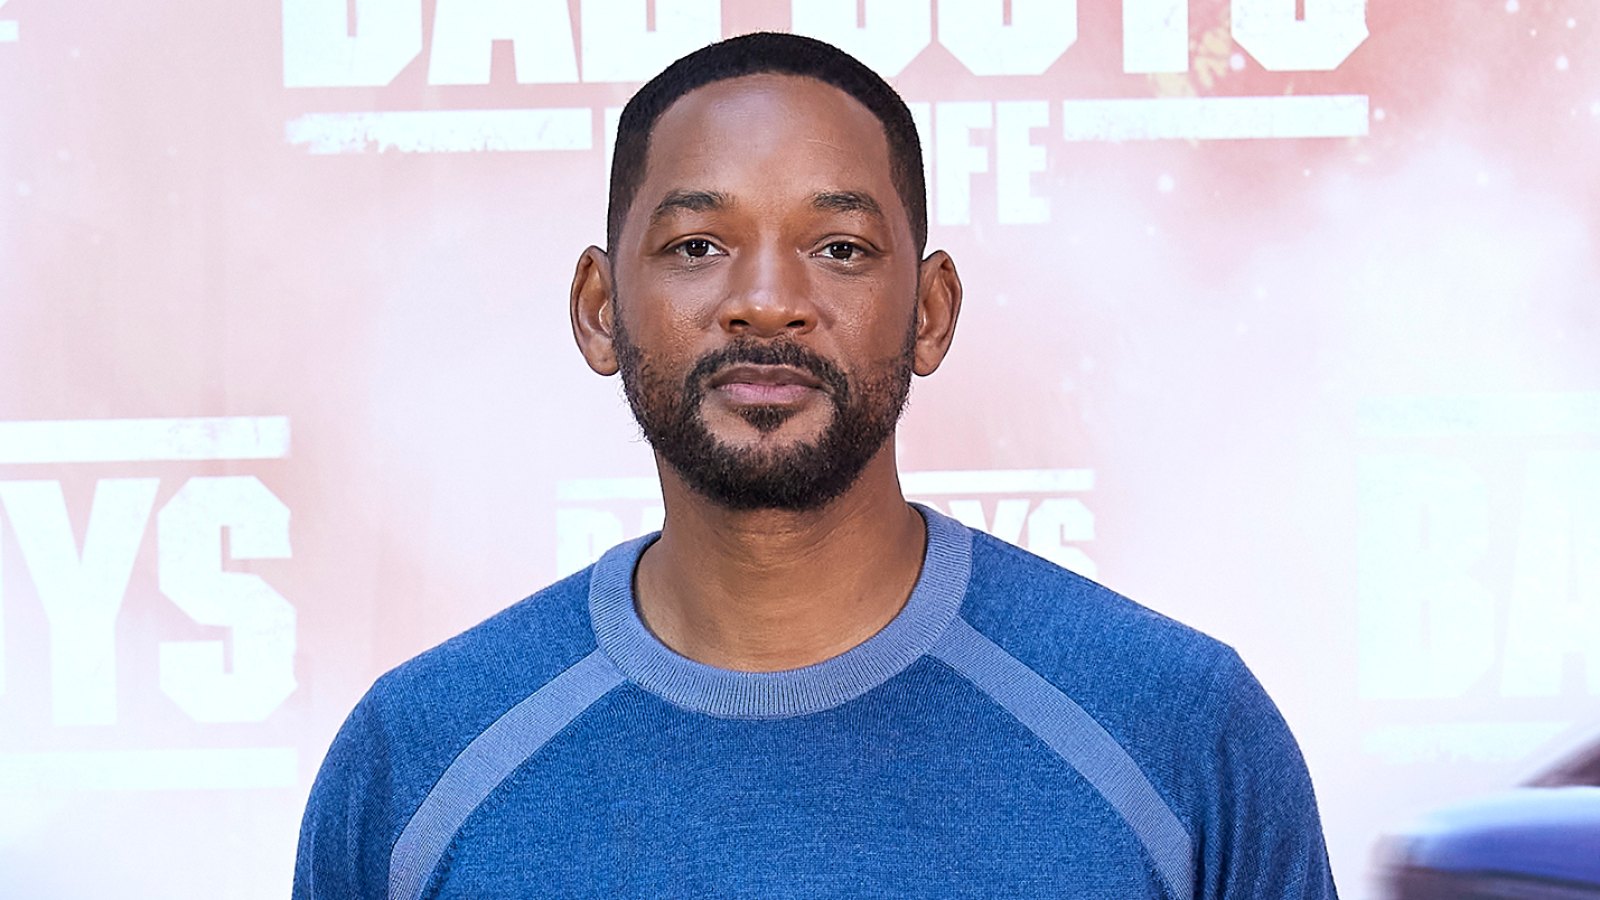 Will Smith Denies Former Assistant's 'Unequivocally False' Claims That He Had Sex With Male Costar